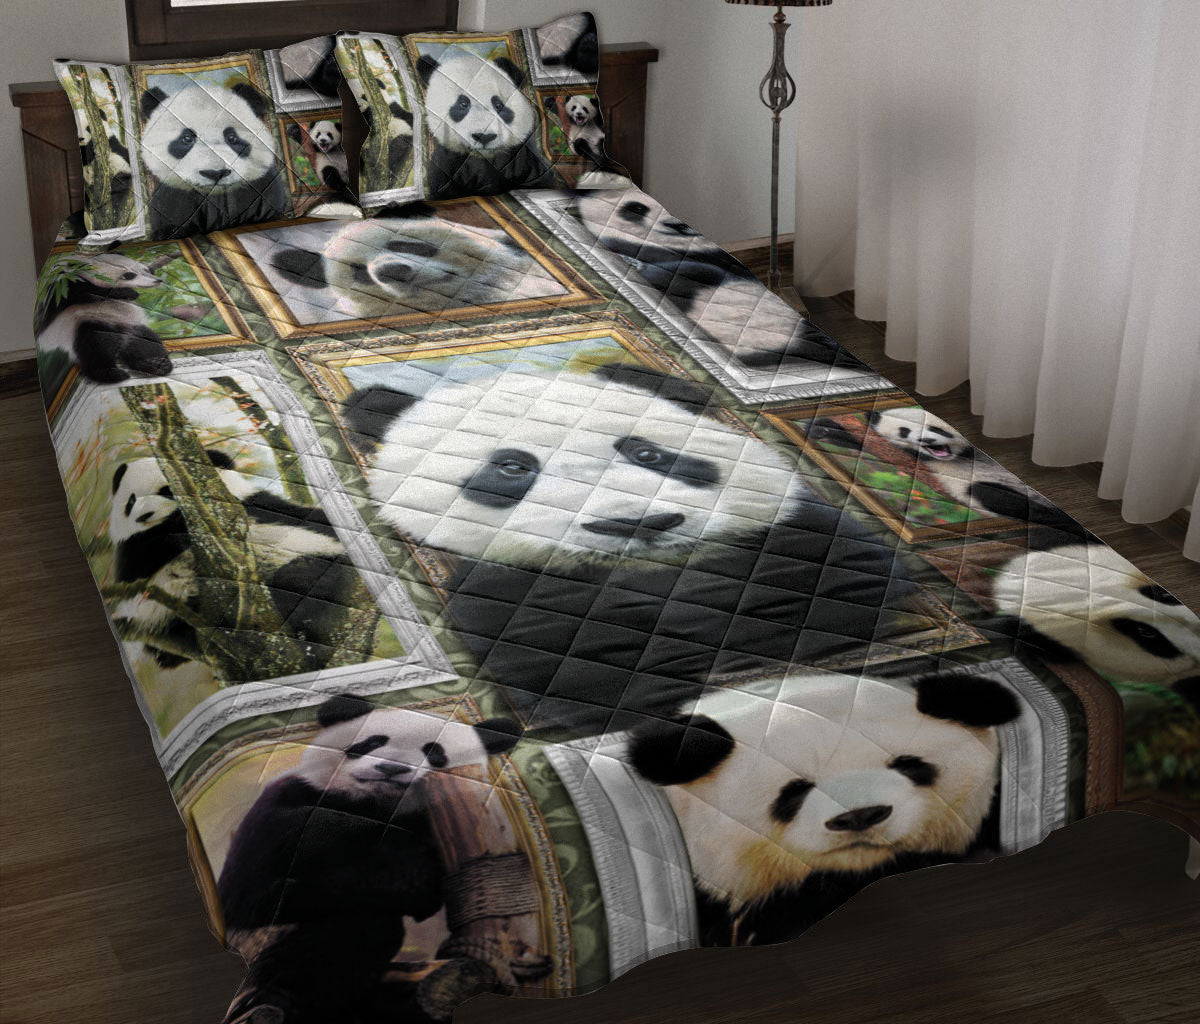 Ohaprints-Quilt-Bed-Set-Pillowcase-Cute-Panda-Frame-Patchwork-Floral-Pattern-Unique-Gift-For-Animal-Lover-Blanket-Bedspread-Bedding-737-Throw (55'' x 60'')